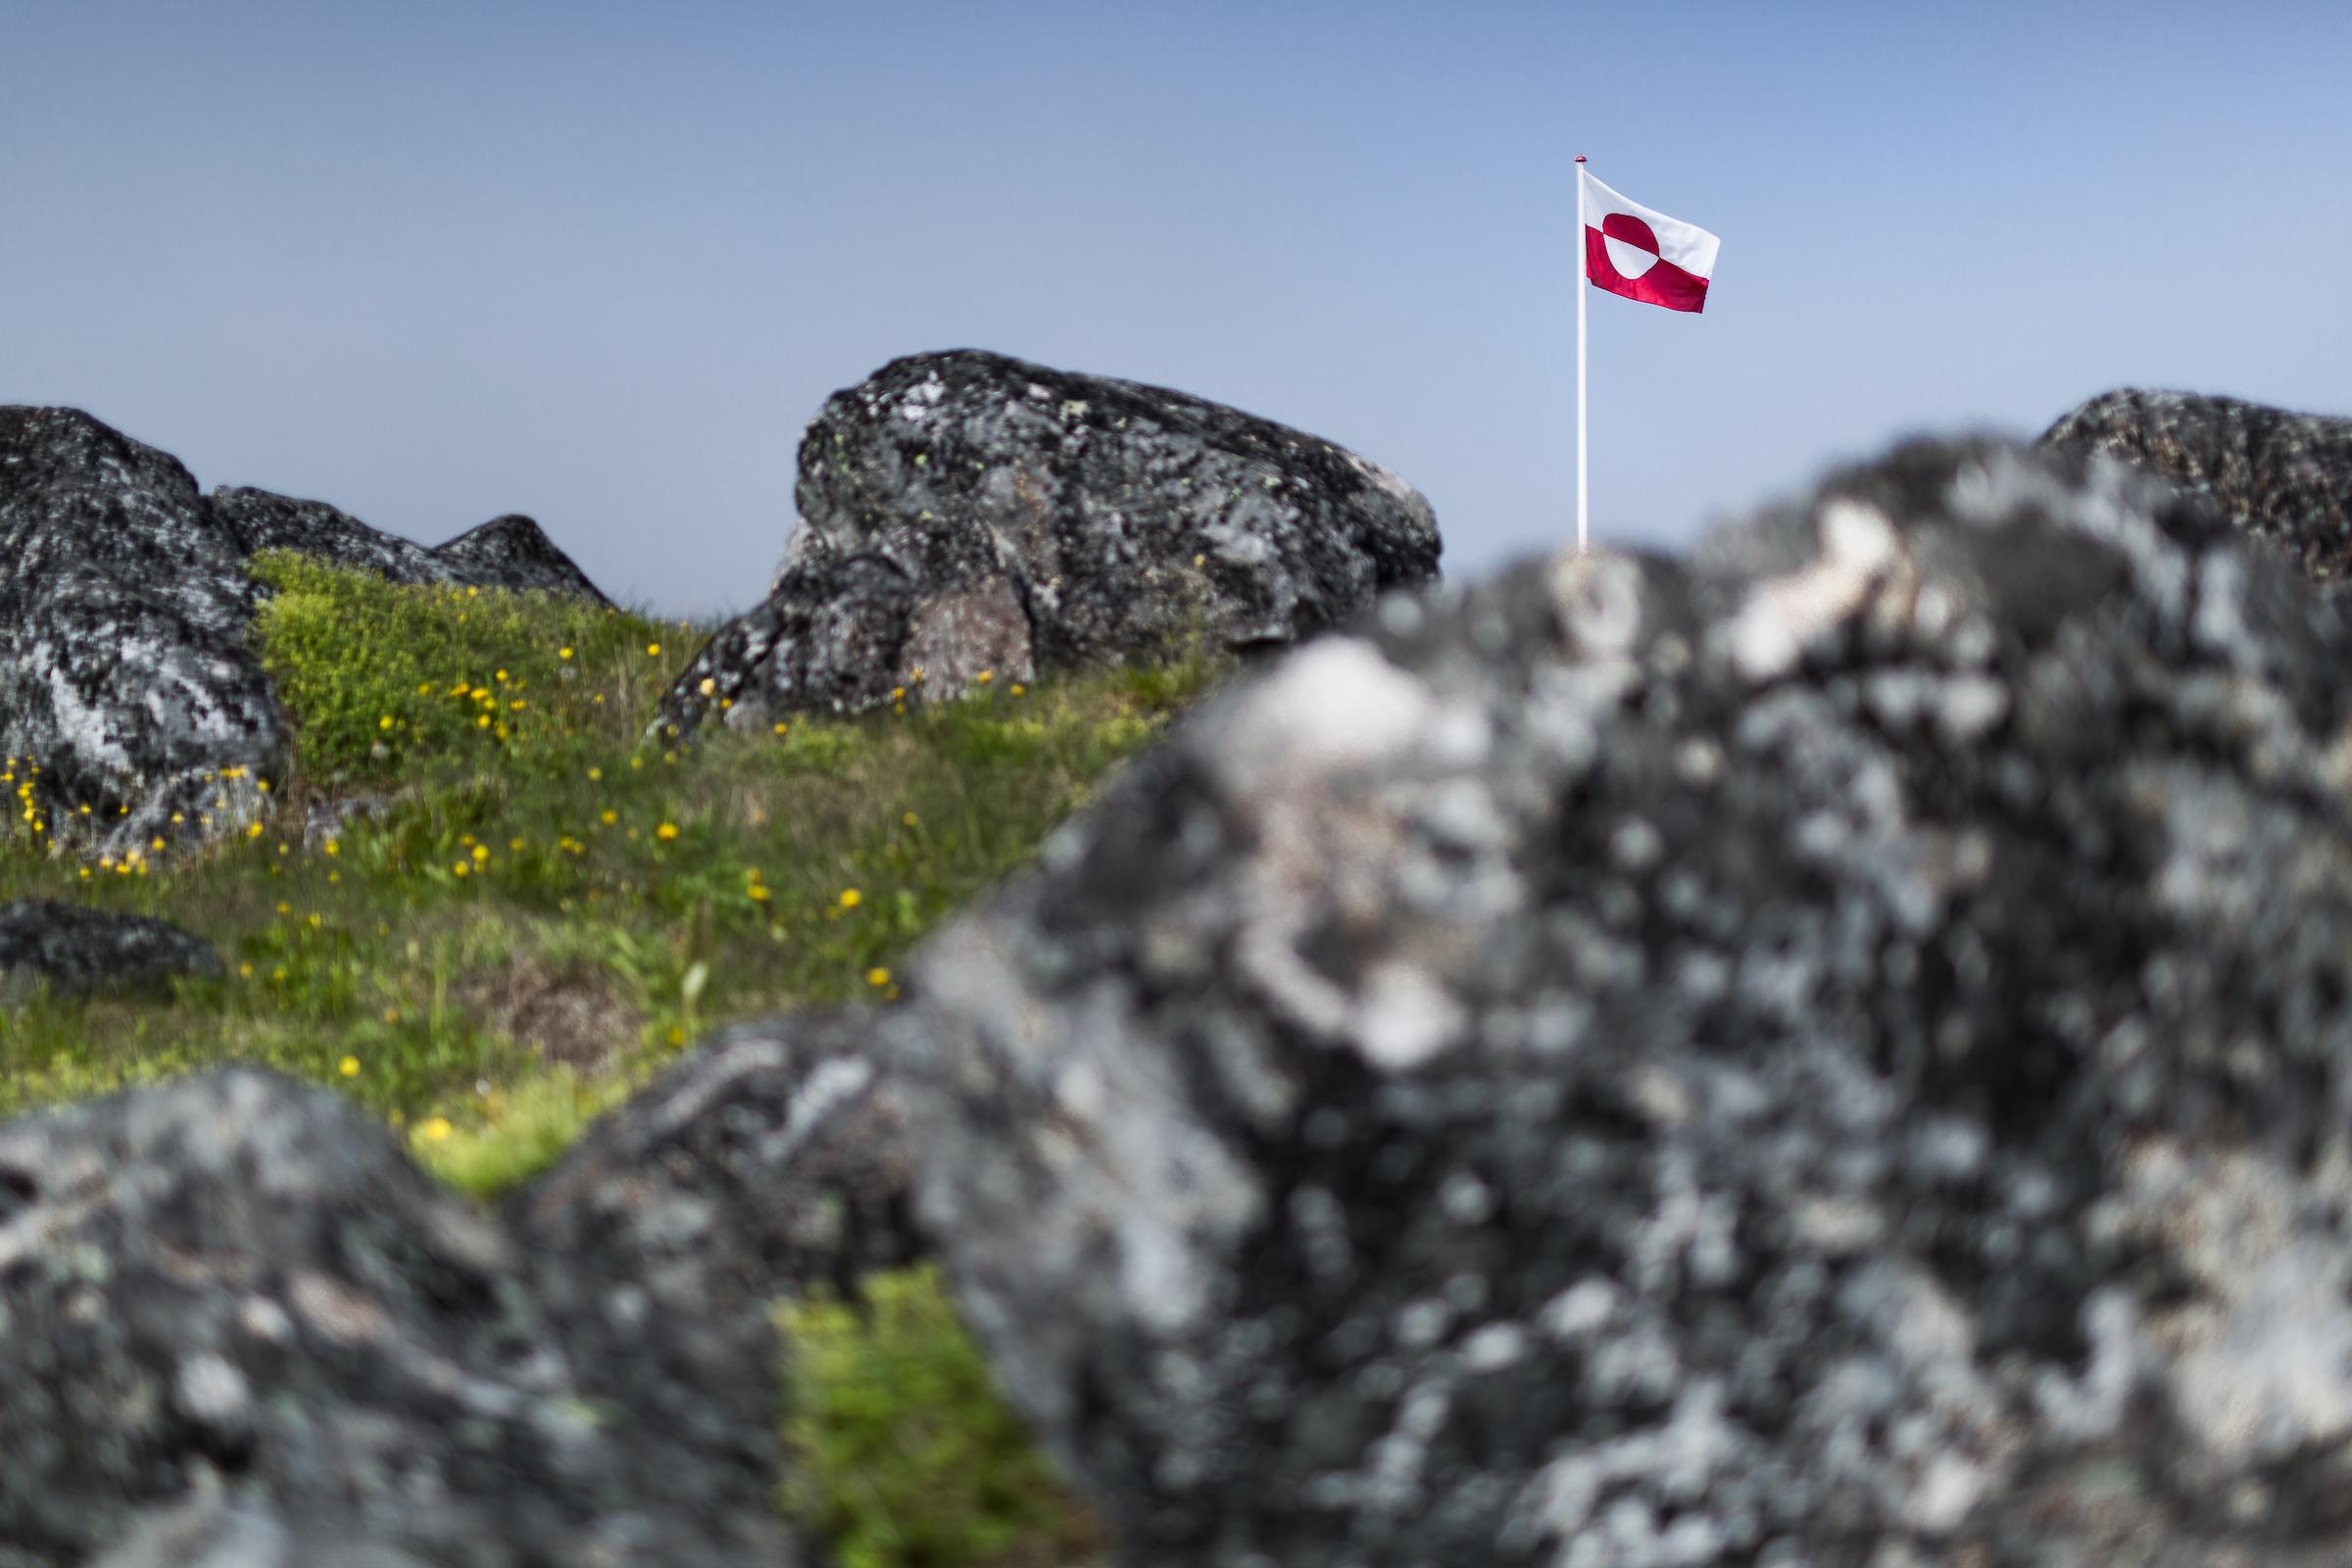 Erfalasorput - Greenland's flag on a sunny day in South Greenland among rocks and flowers. Photo by Mads Pihl - Visit Greenland